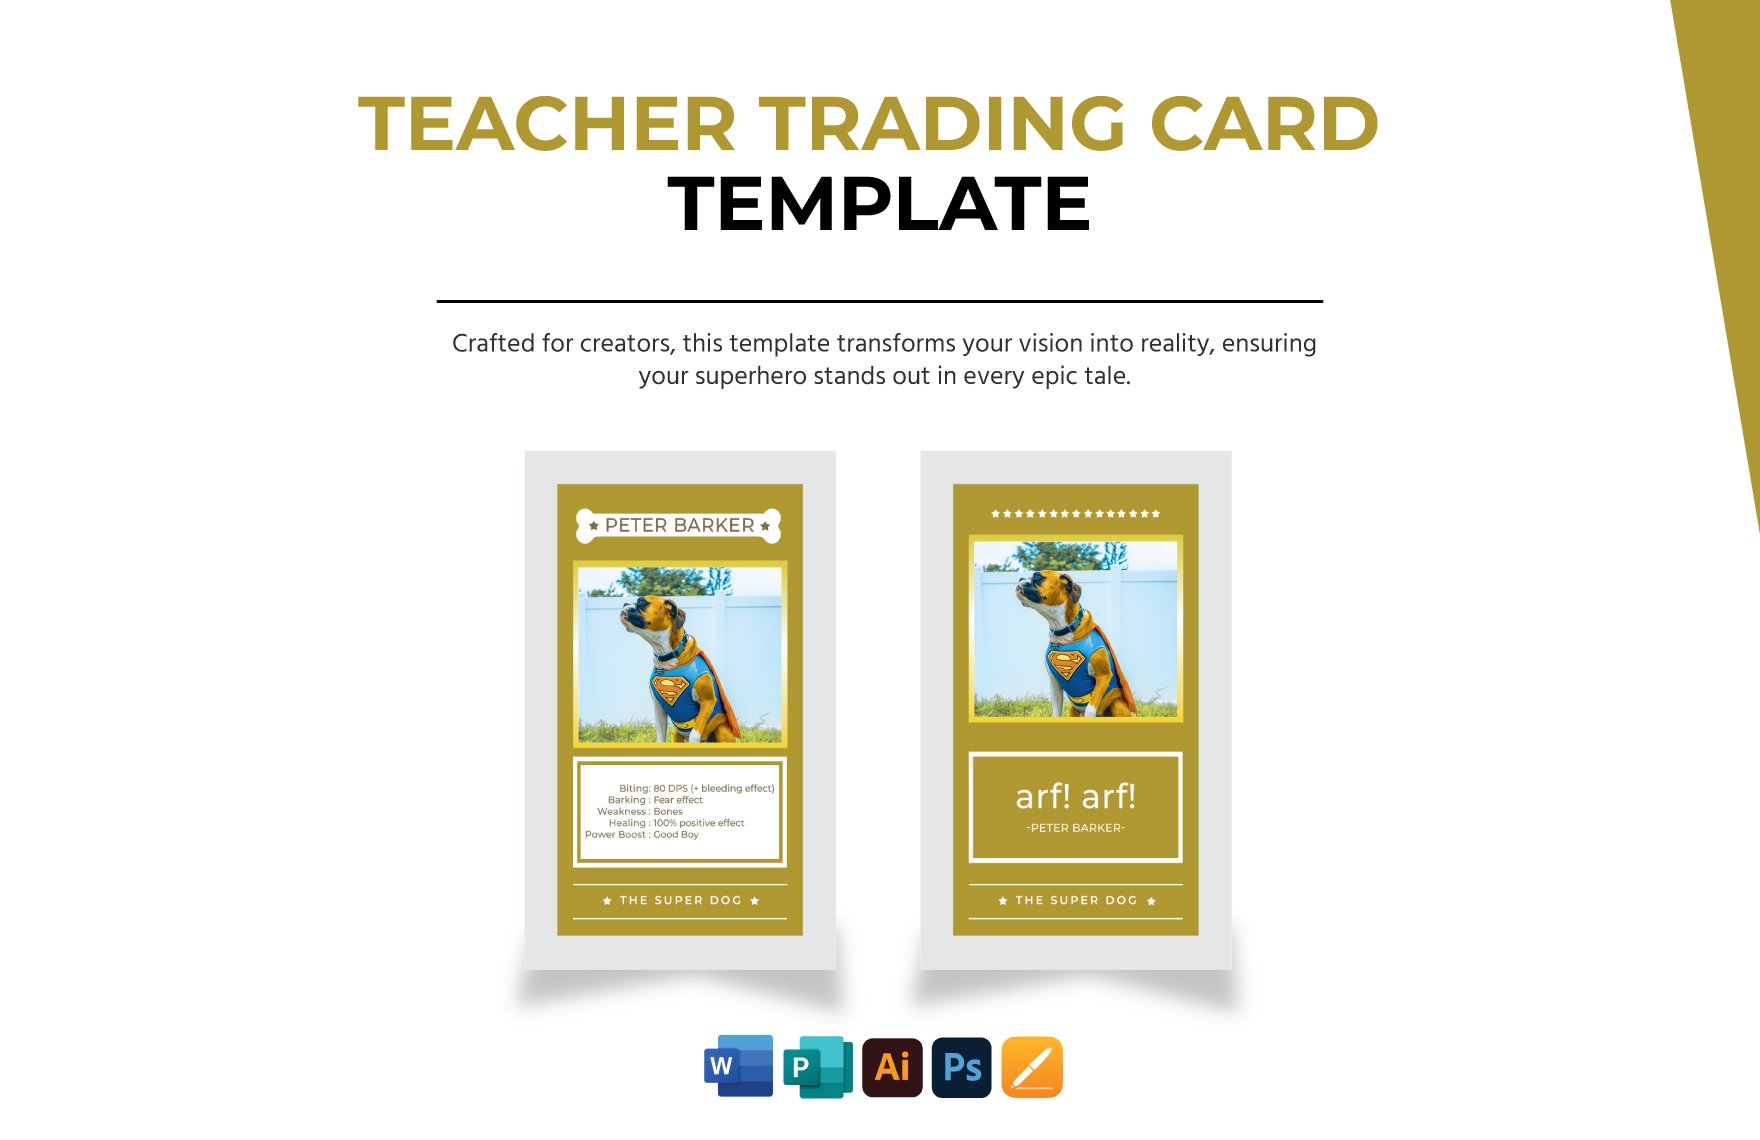 Superhero Trading Card Template in Word, Illustrator, PSD, Apple Pages, Publisher